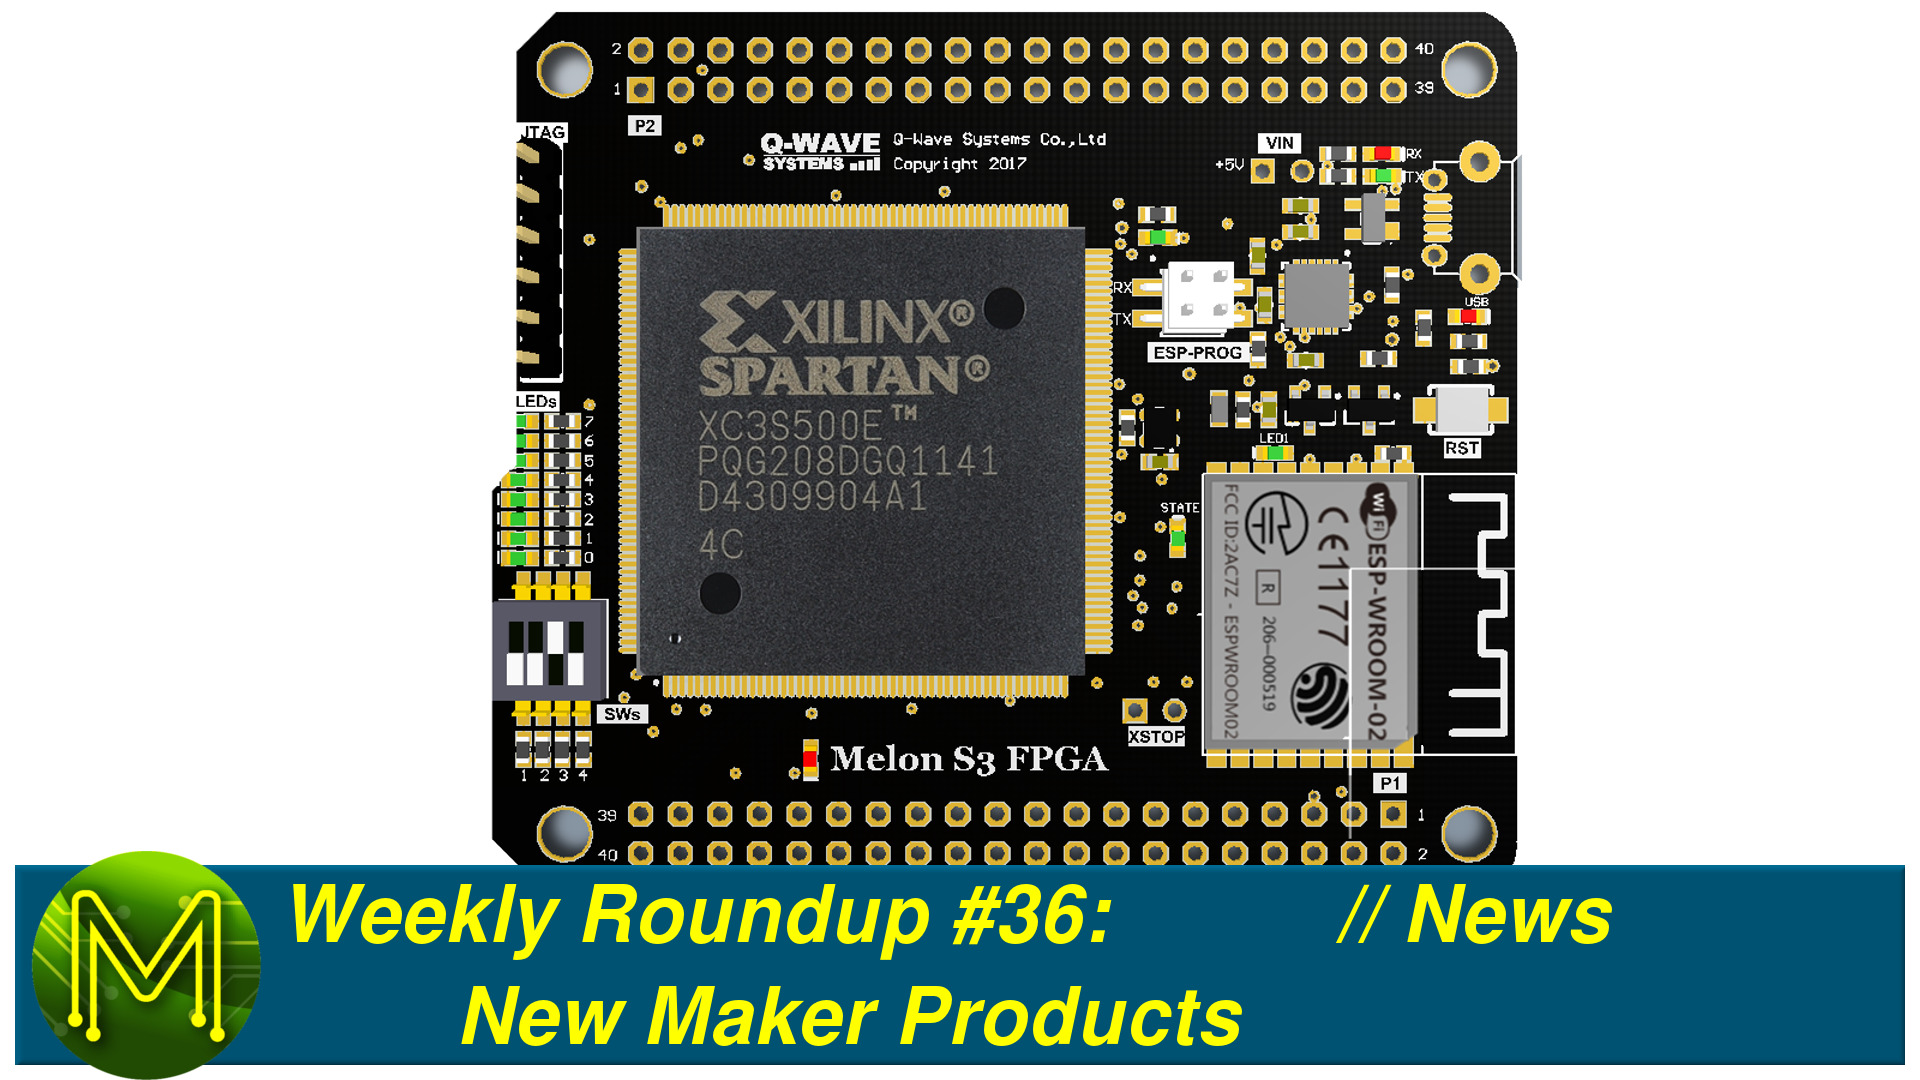 Weekly Roundup #36 - New Maker Products // News